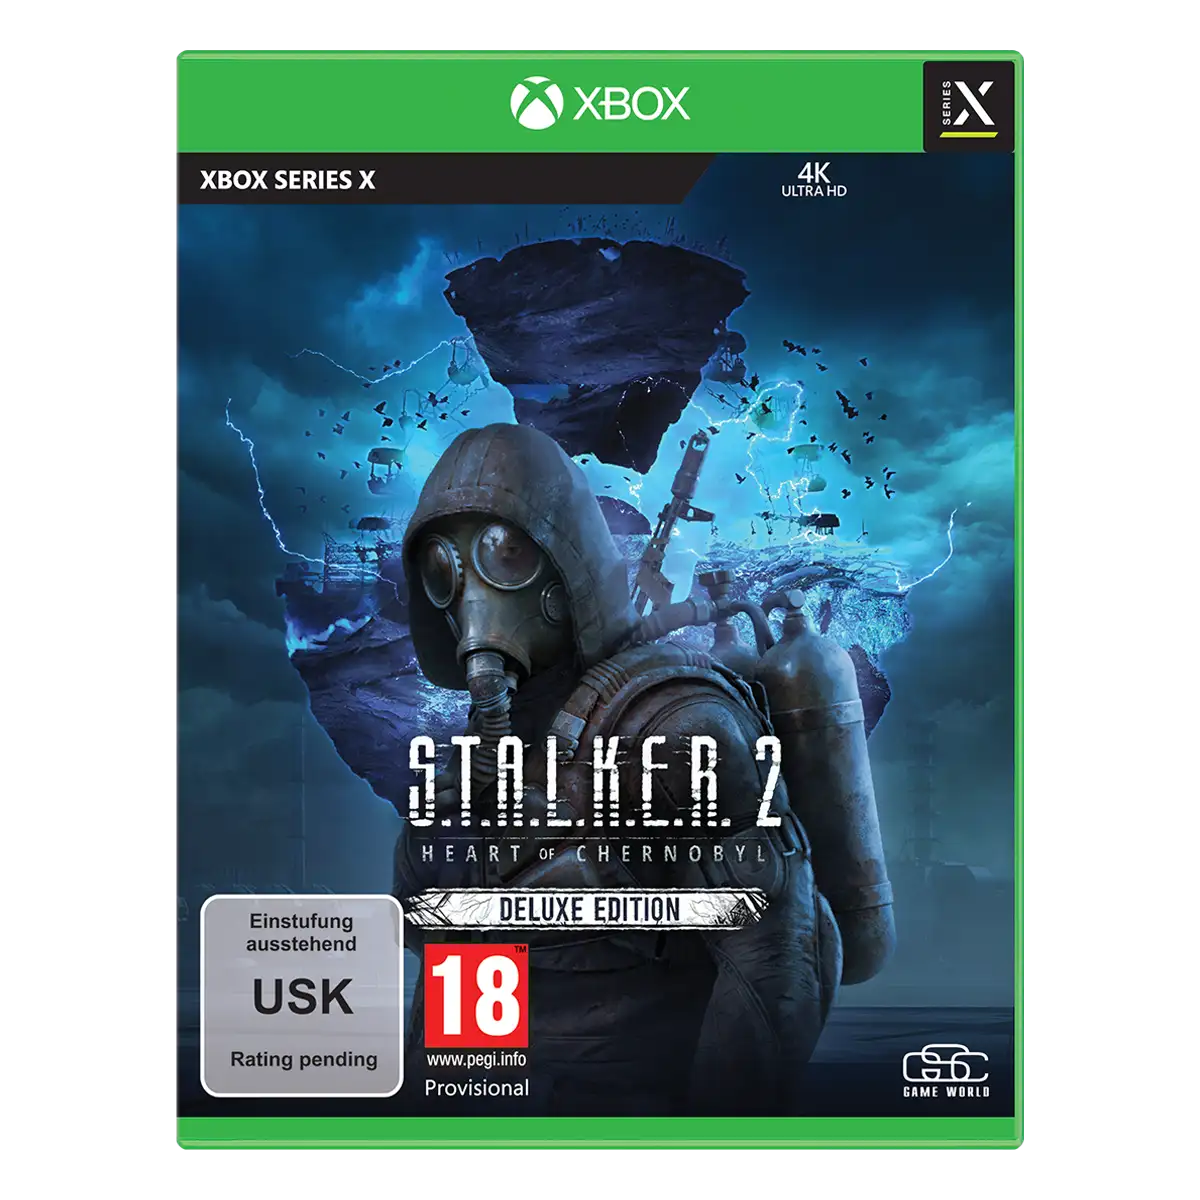 S.T.A.L.K.E.R. 2: Heart of Chornobyl Collector's Edition (XSRX)